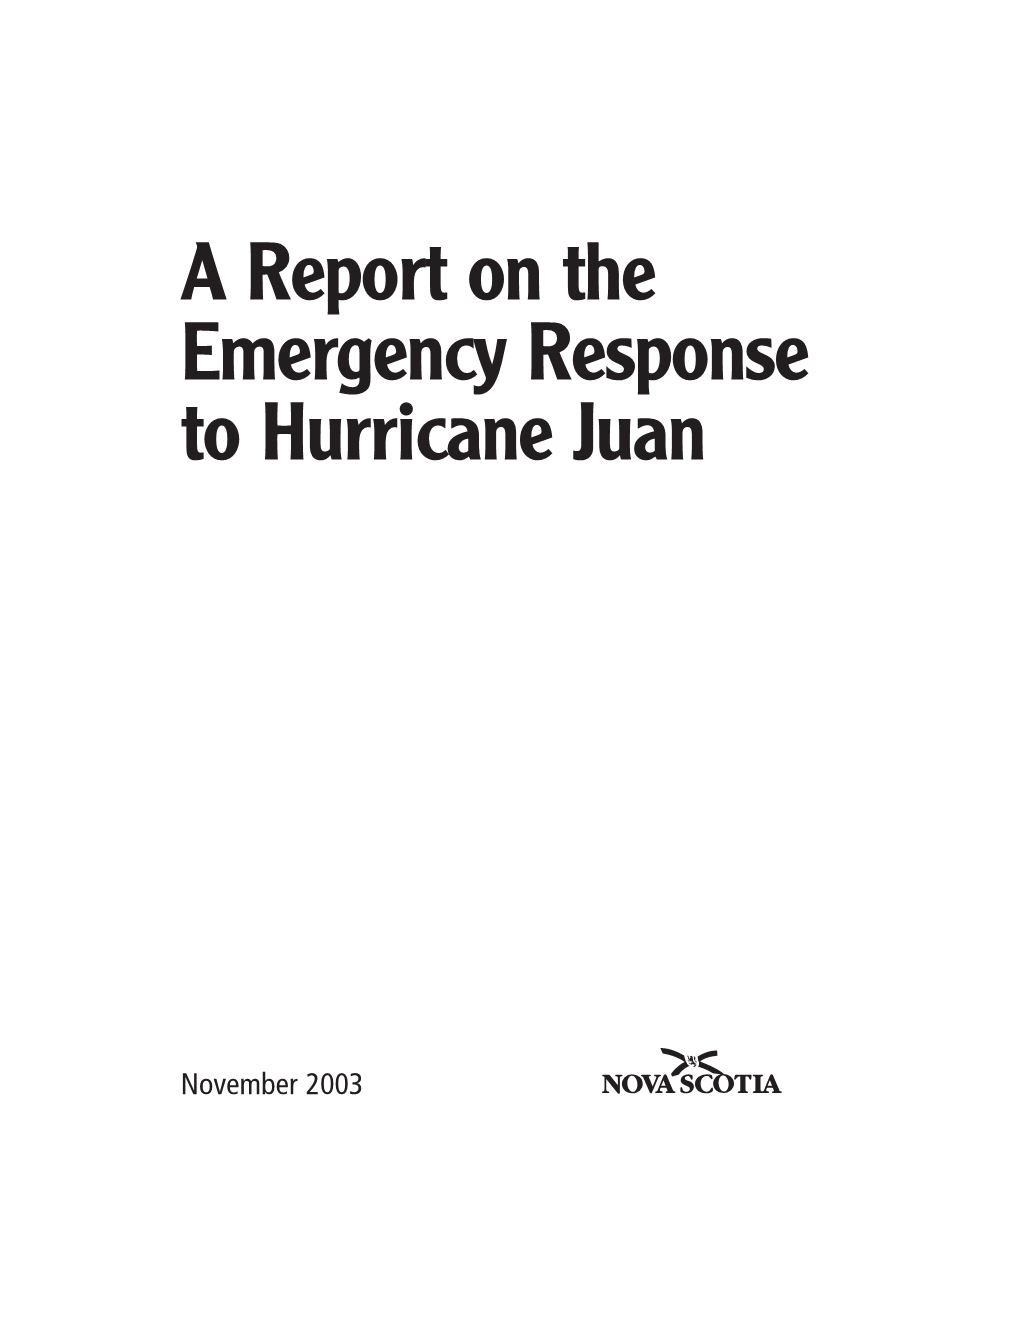 A Report on the Emergency Response to Hurricane Juan